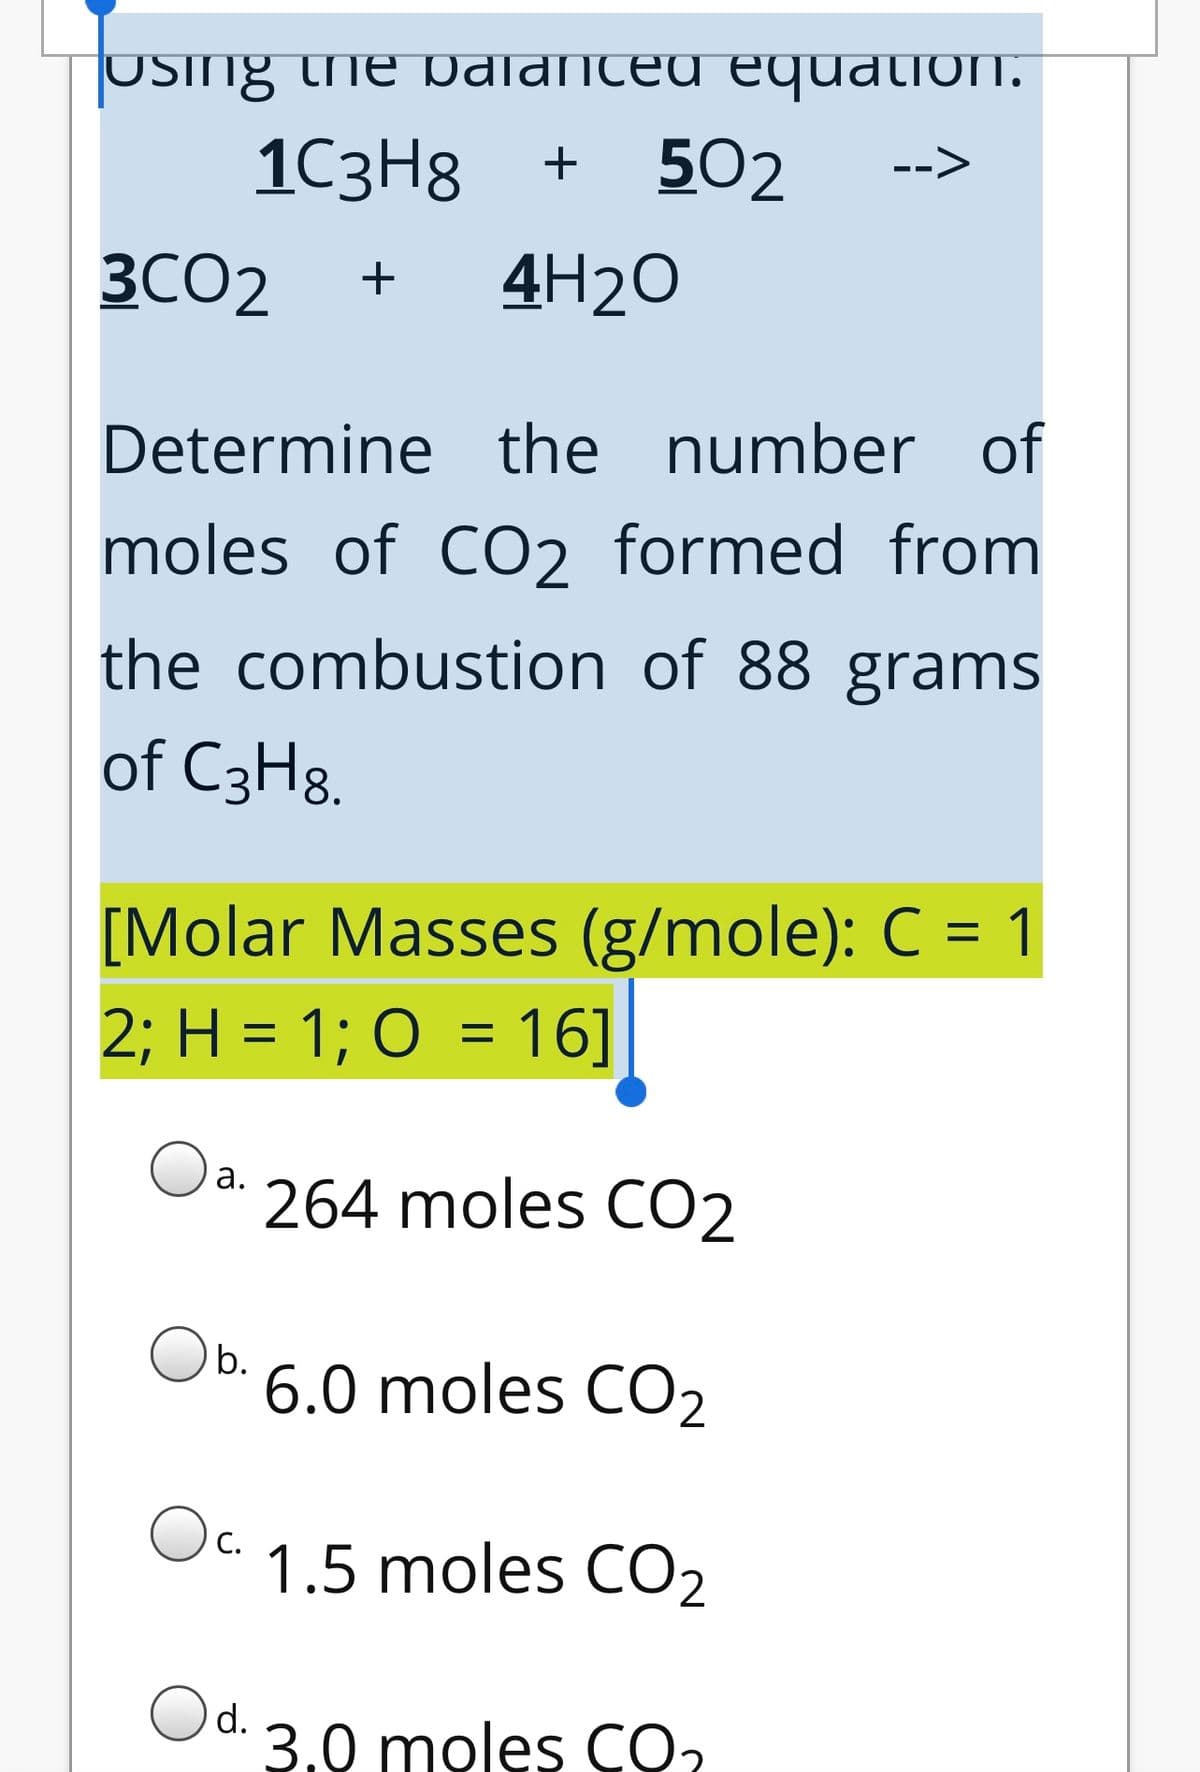 USing the pdlanced equation.
1C3H8
+
502
3CO2
+
4H2O
Determine the number of
moles of CO2 formed from
the combustion of 88 grams
of C3H8.
[Molar Masses (g/mole): C = 1
2; H = 1; O = 16]
Oa.
264 moles CO2
b.
6.0 moles CO2
Oc.
1.5 moles CO2
Od.
3.0 moles CO2
